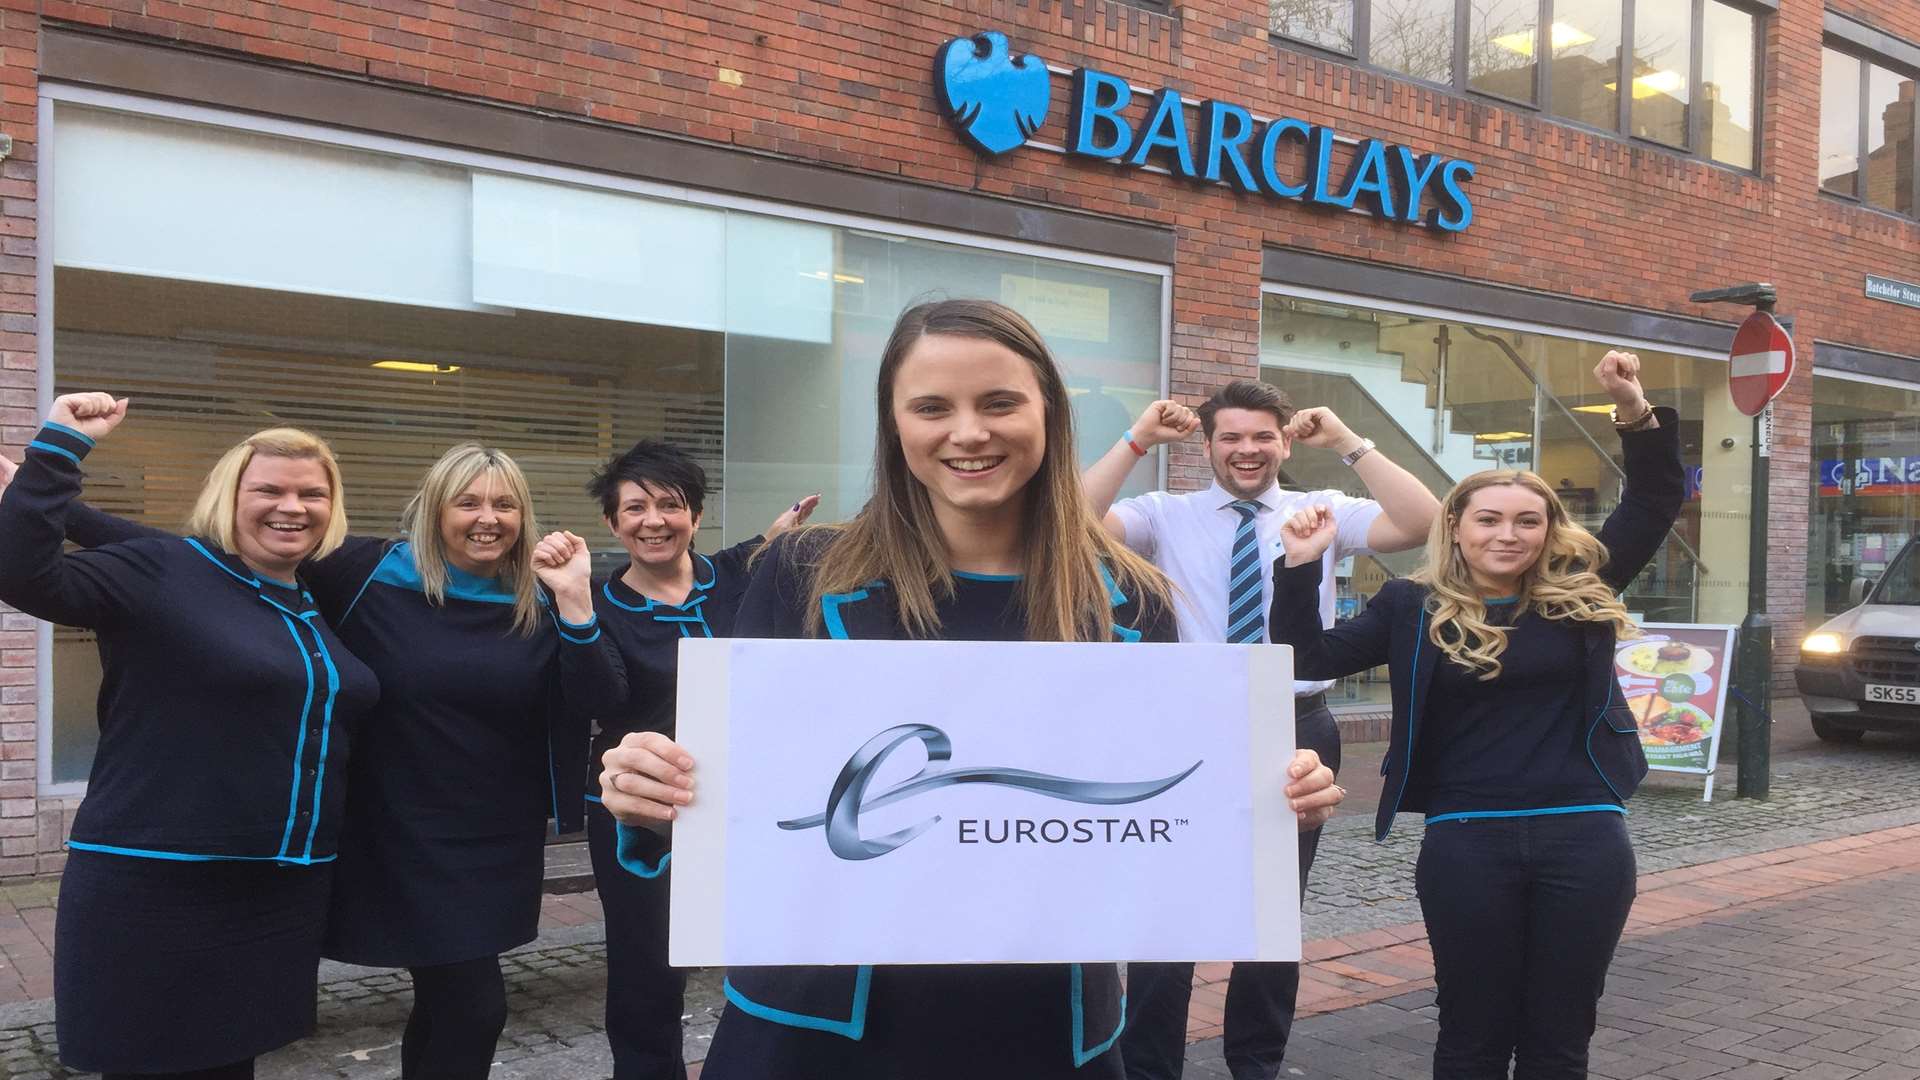 Barclays will double funds raised at the KM Big Charity Quiz on March 9 while teams will have the chance to win Eurostar vouchers.